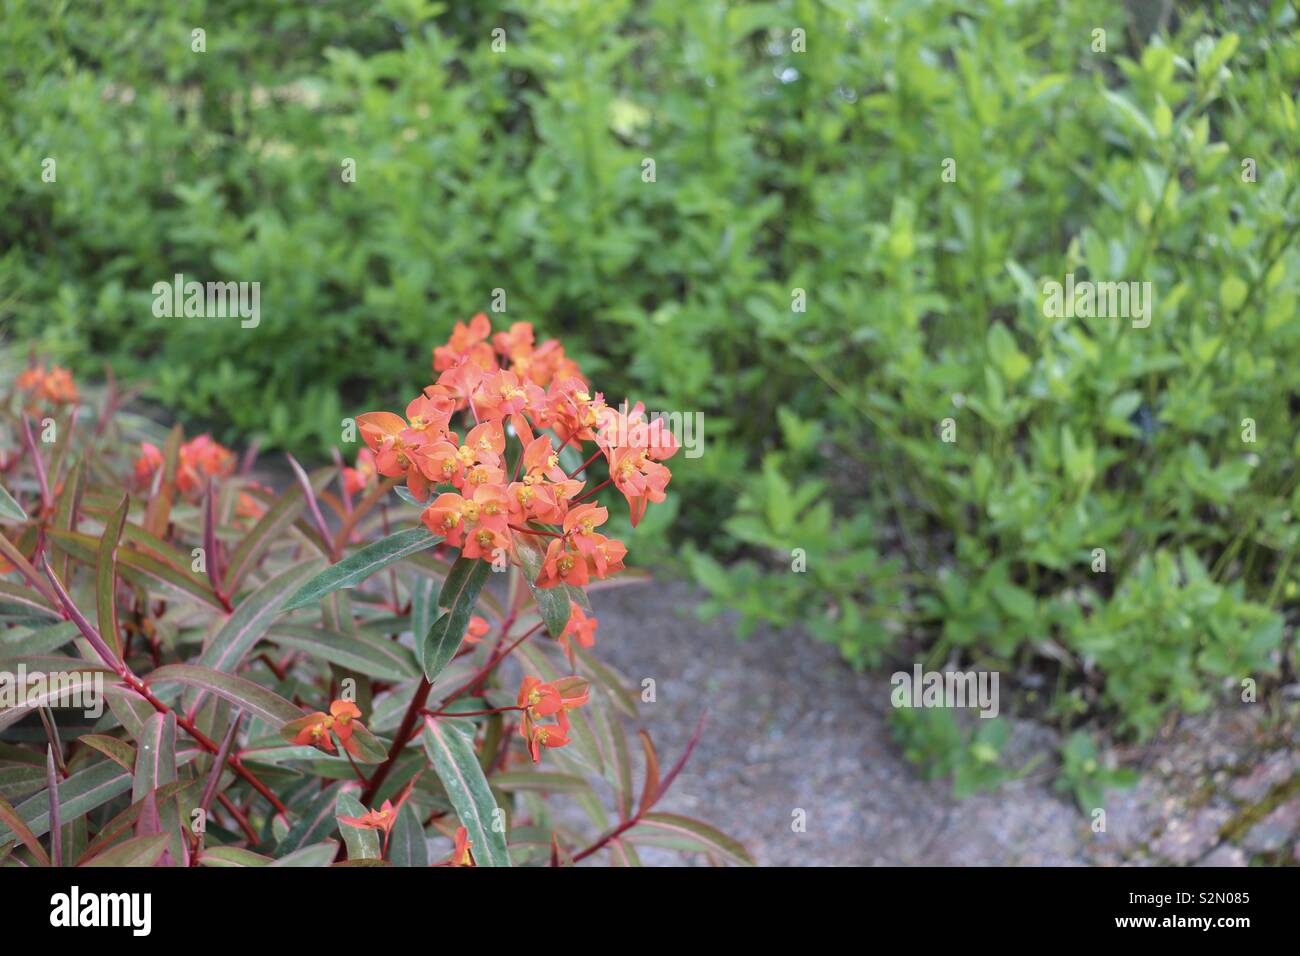 Red flowering plant in bloom Stock Photo